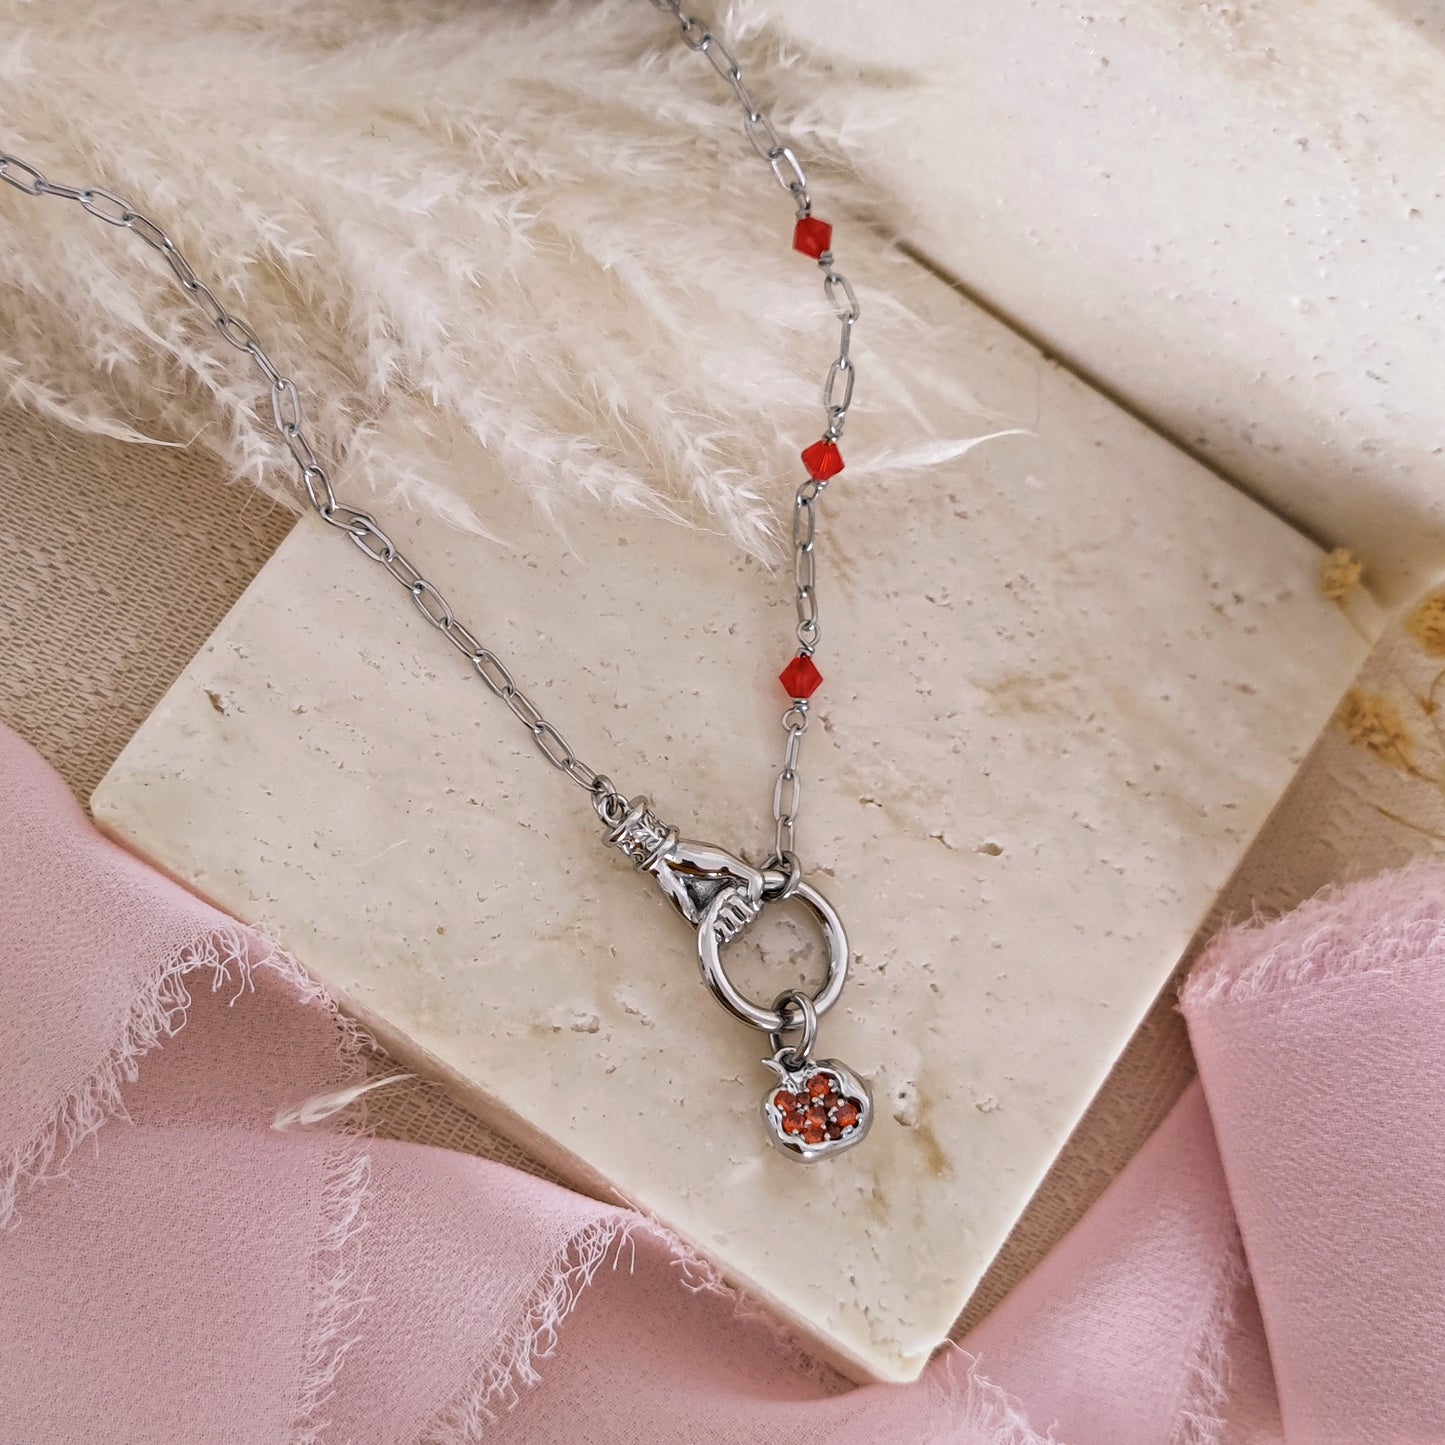 Persephone and Hades Pomegranate Necklace, silver